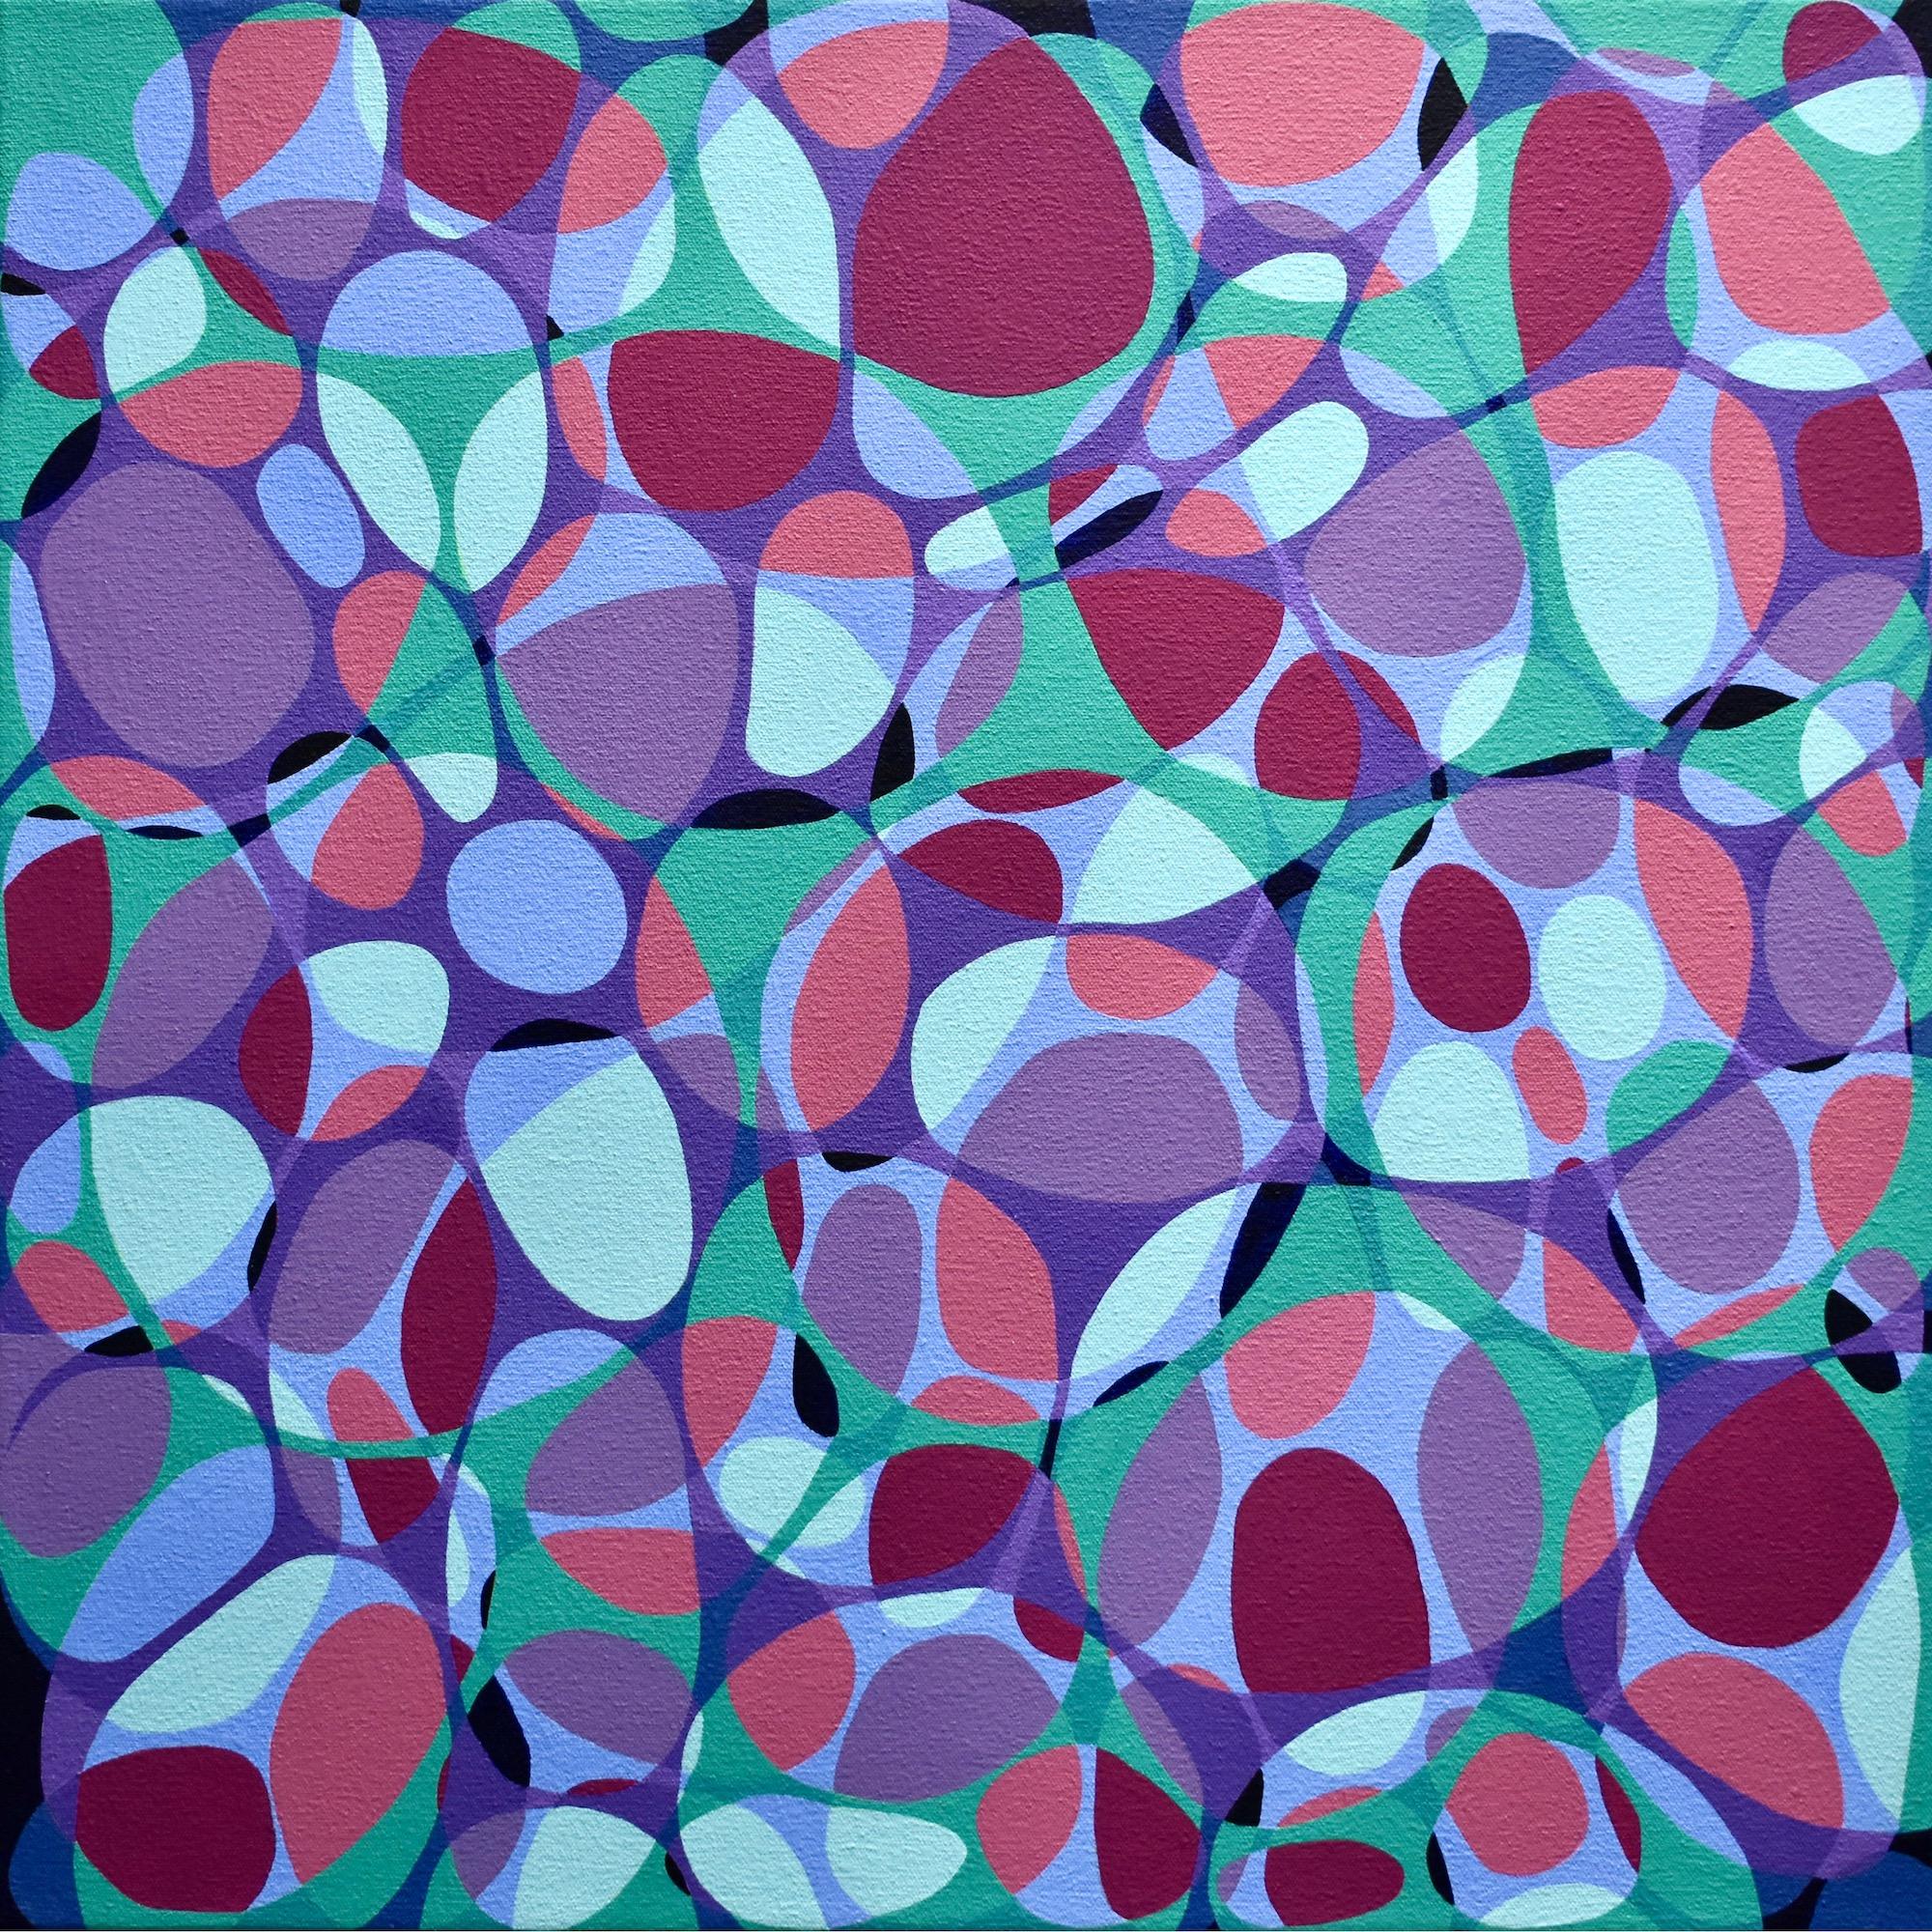 "Kinship 8", acrylic painting, abstract, webs, bubbles, ovals, rose, blue, green - Painting by Denise Driscoll